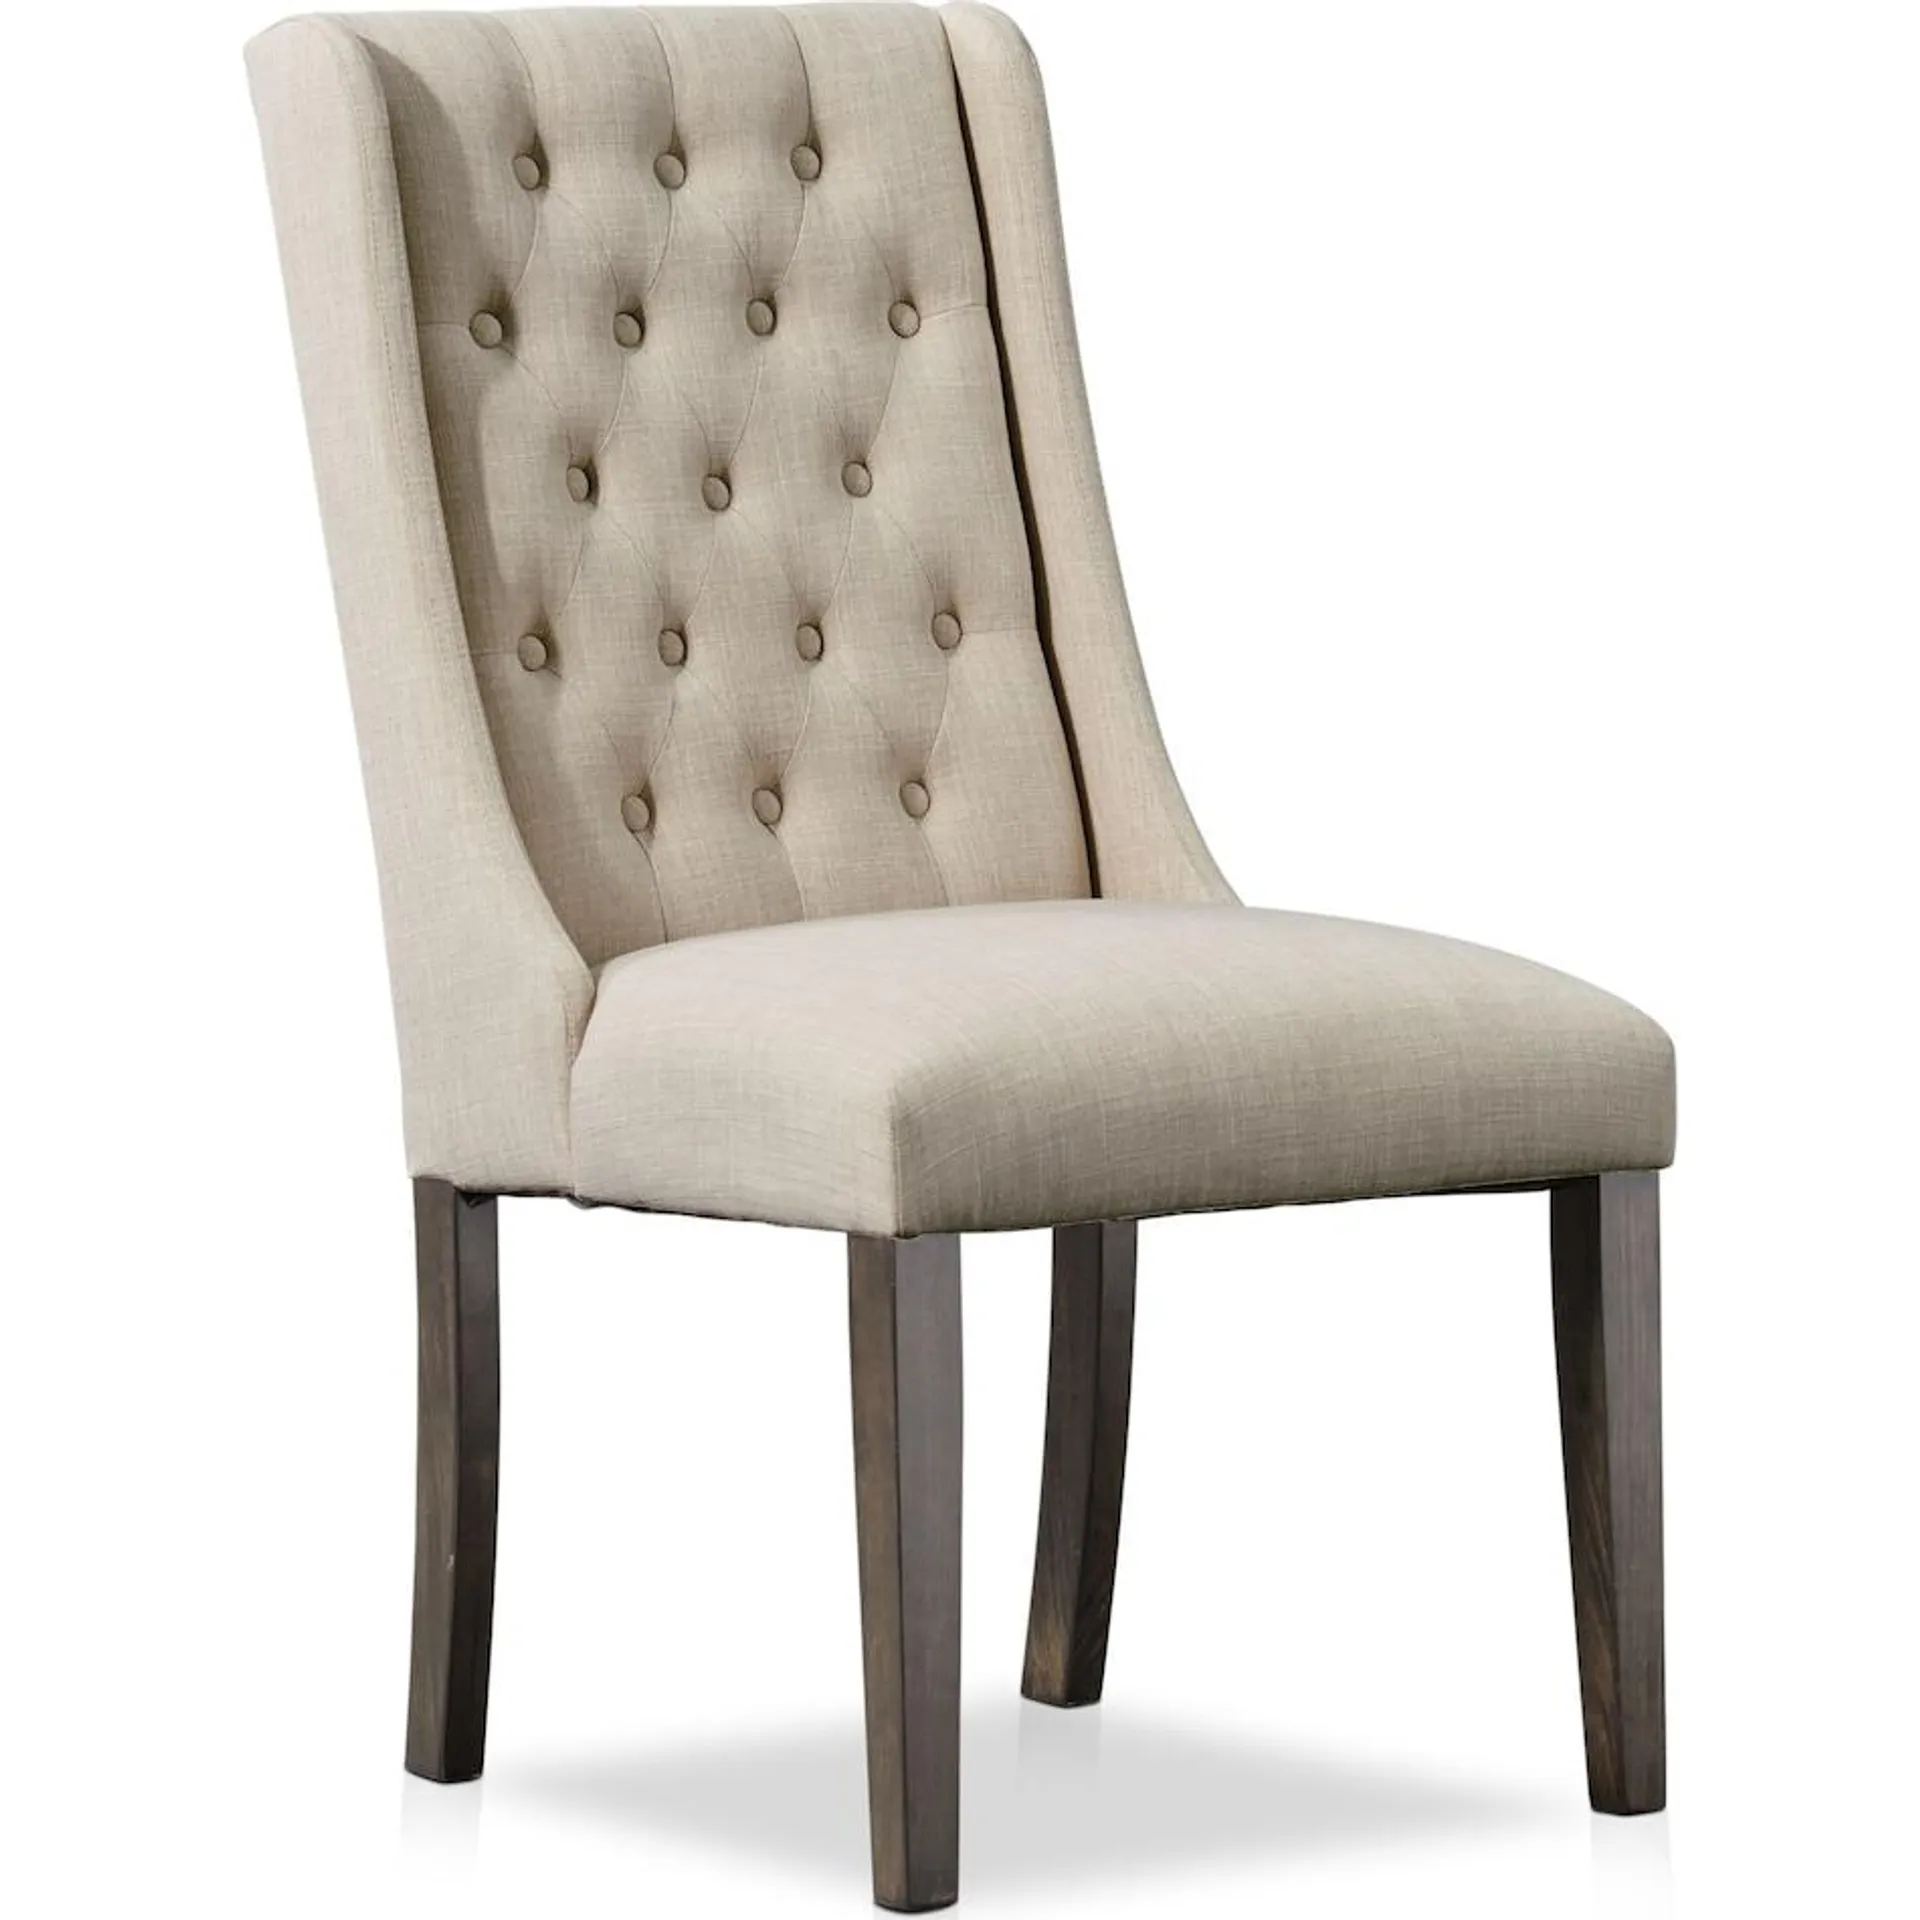 Carlisle Upholstered Dining Chair